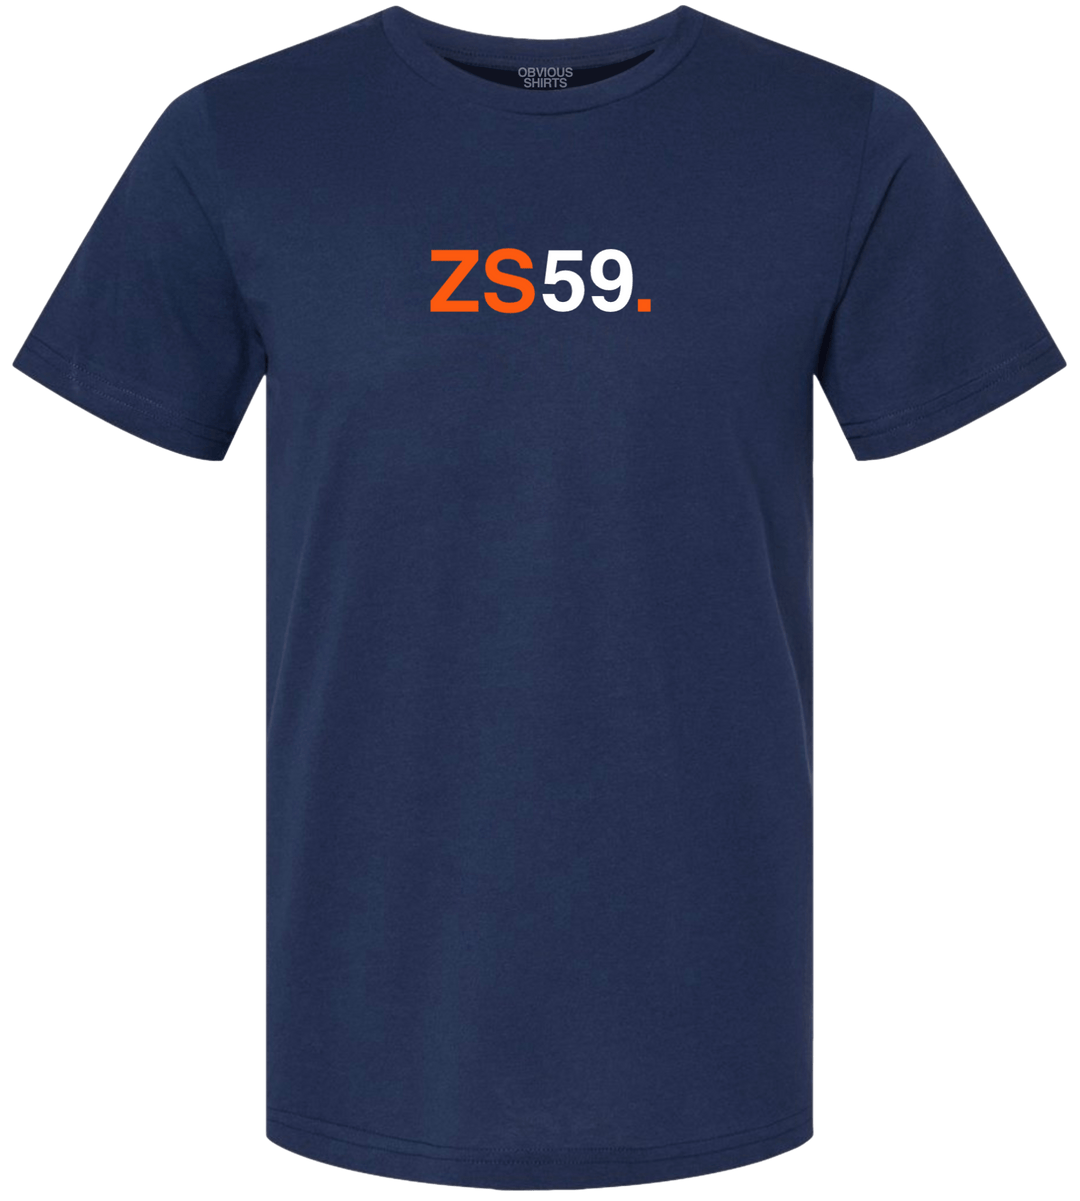 ZS59. - OBVIOUS SHIRTS